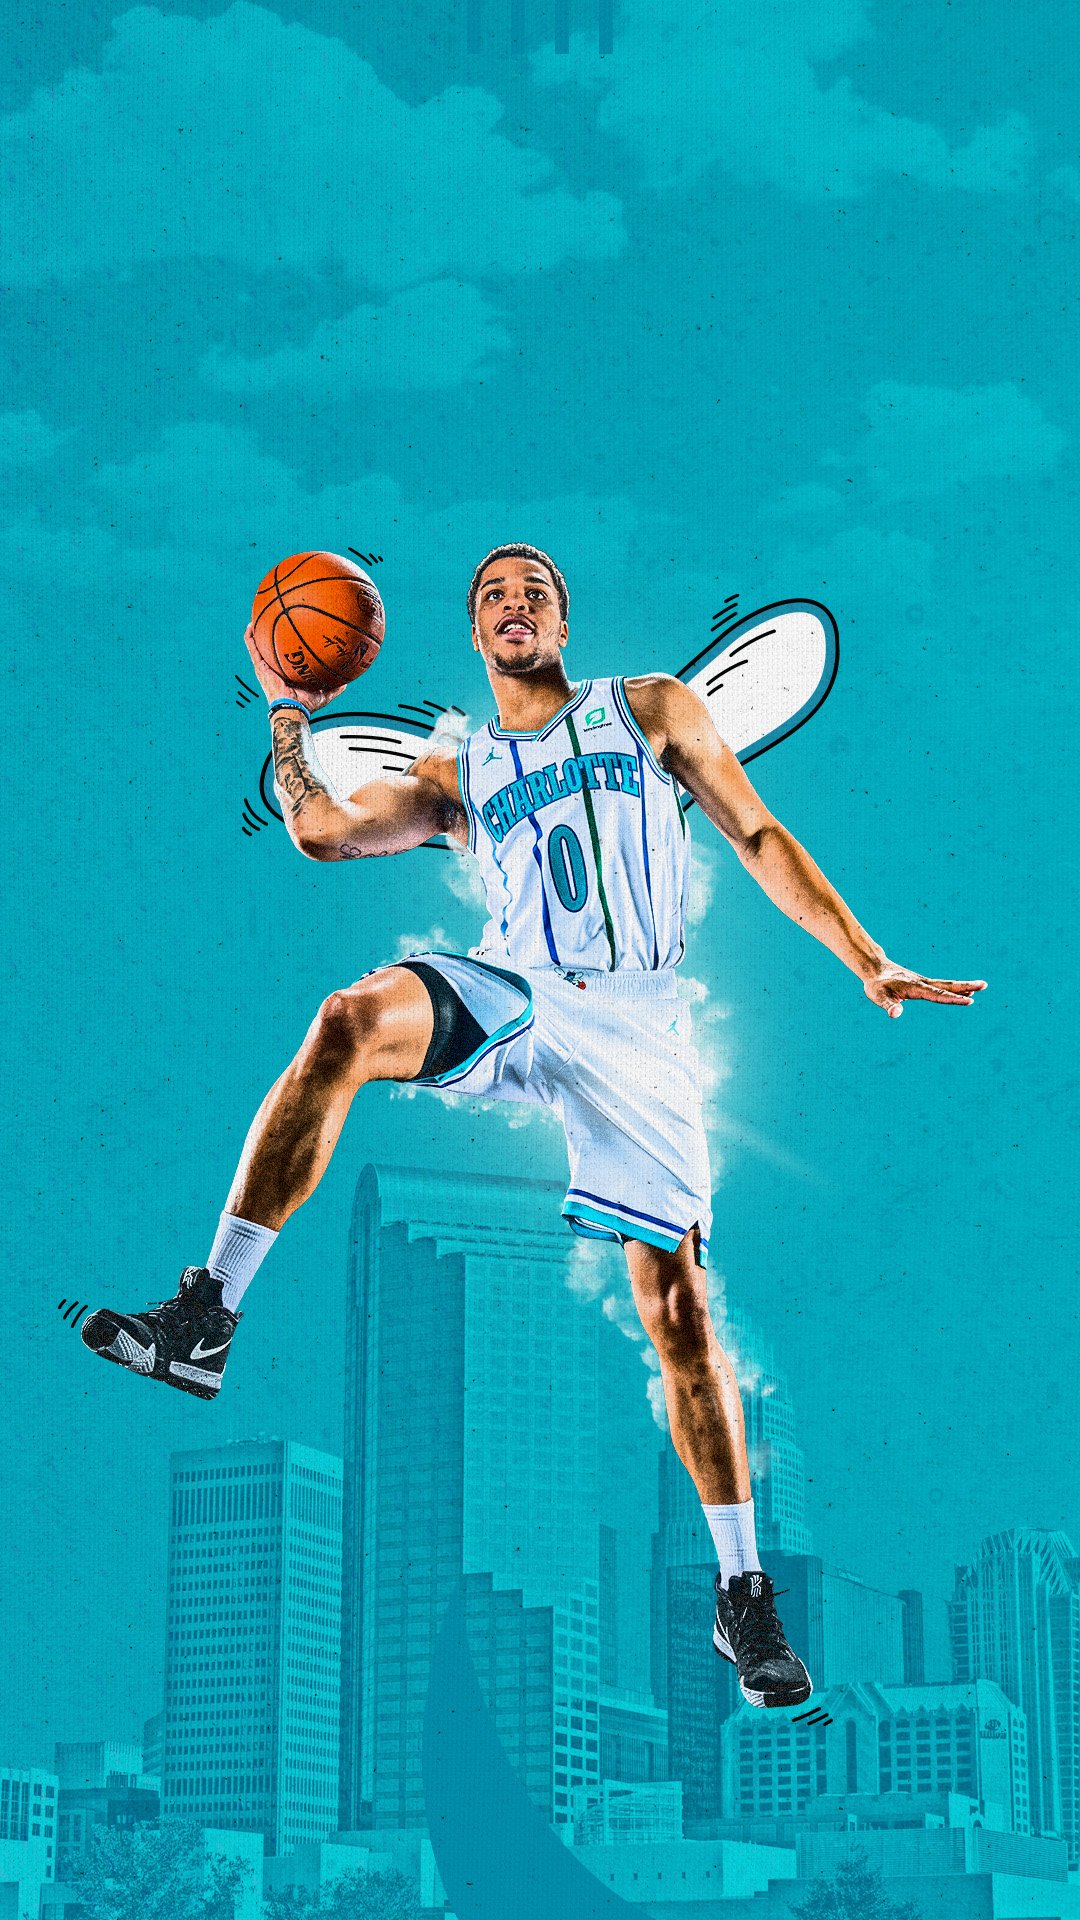 Charlotte hornets on ð wallpaper wednesday is here ð ð use this as your phones wallpaper ð screenshot ð reply to this tweet ð well provide a new wallpaper each wednesday